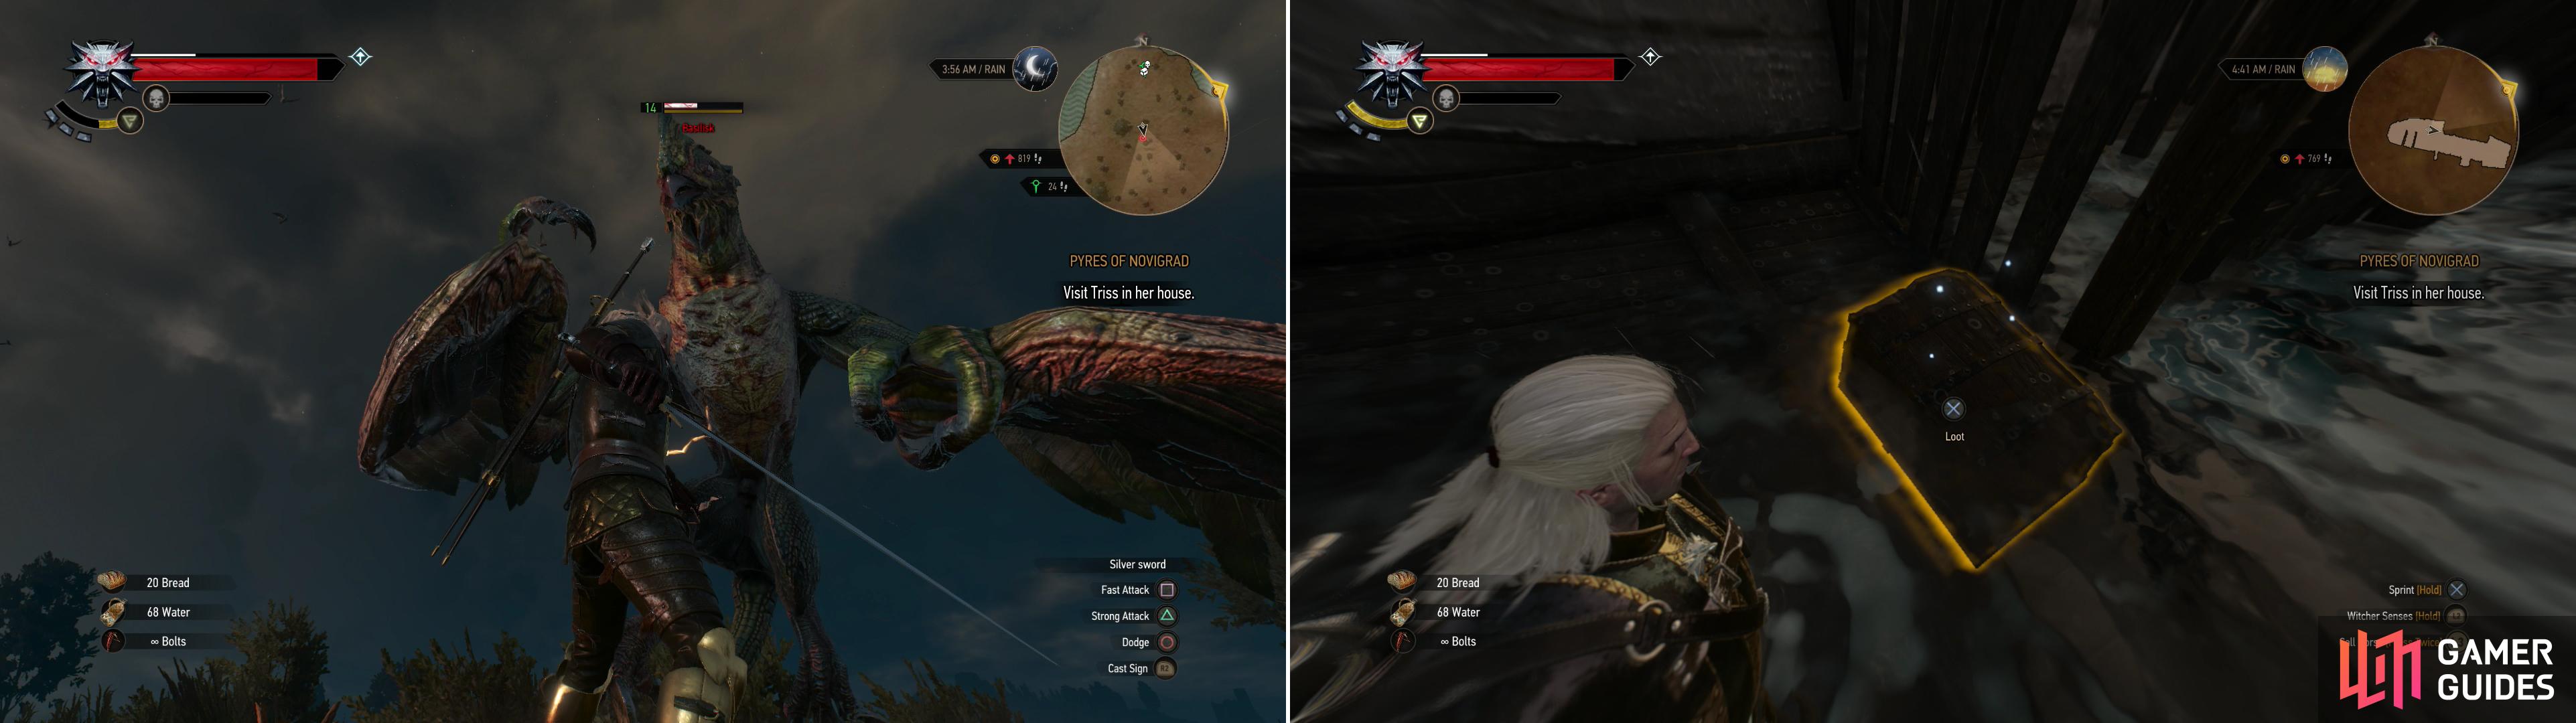 Defeat a Basilisk (left) then board a neaby shipwreck and claim the treasure it’s still carrying (right).